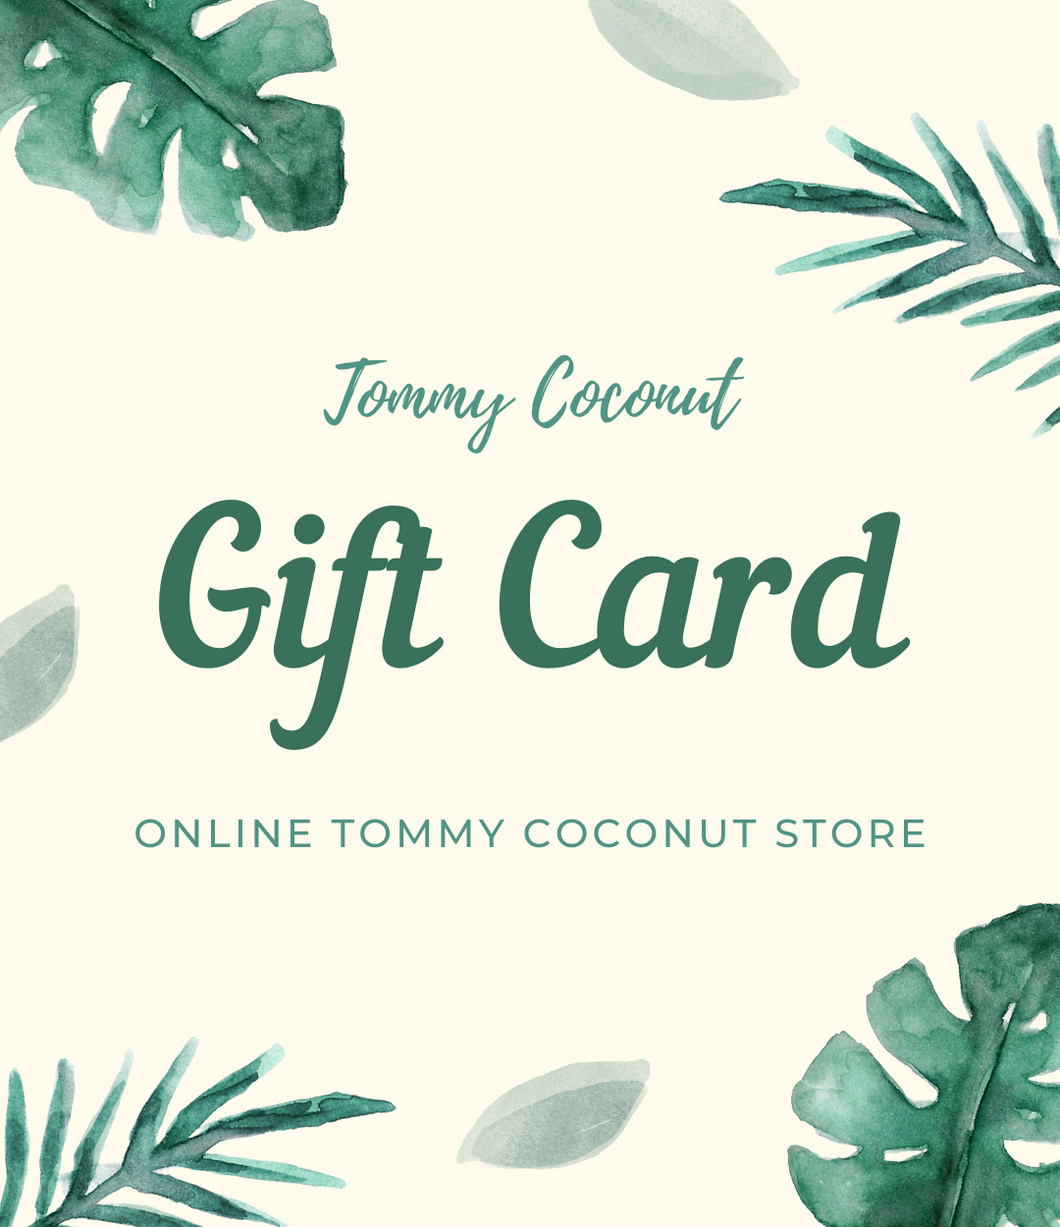 Tommy Coconut Gift card